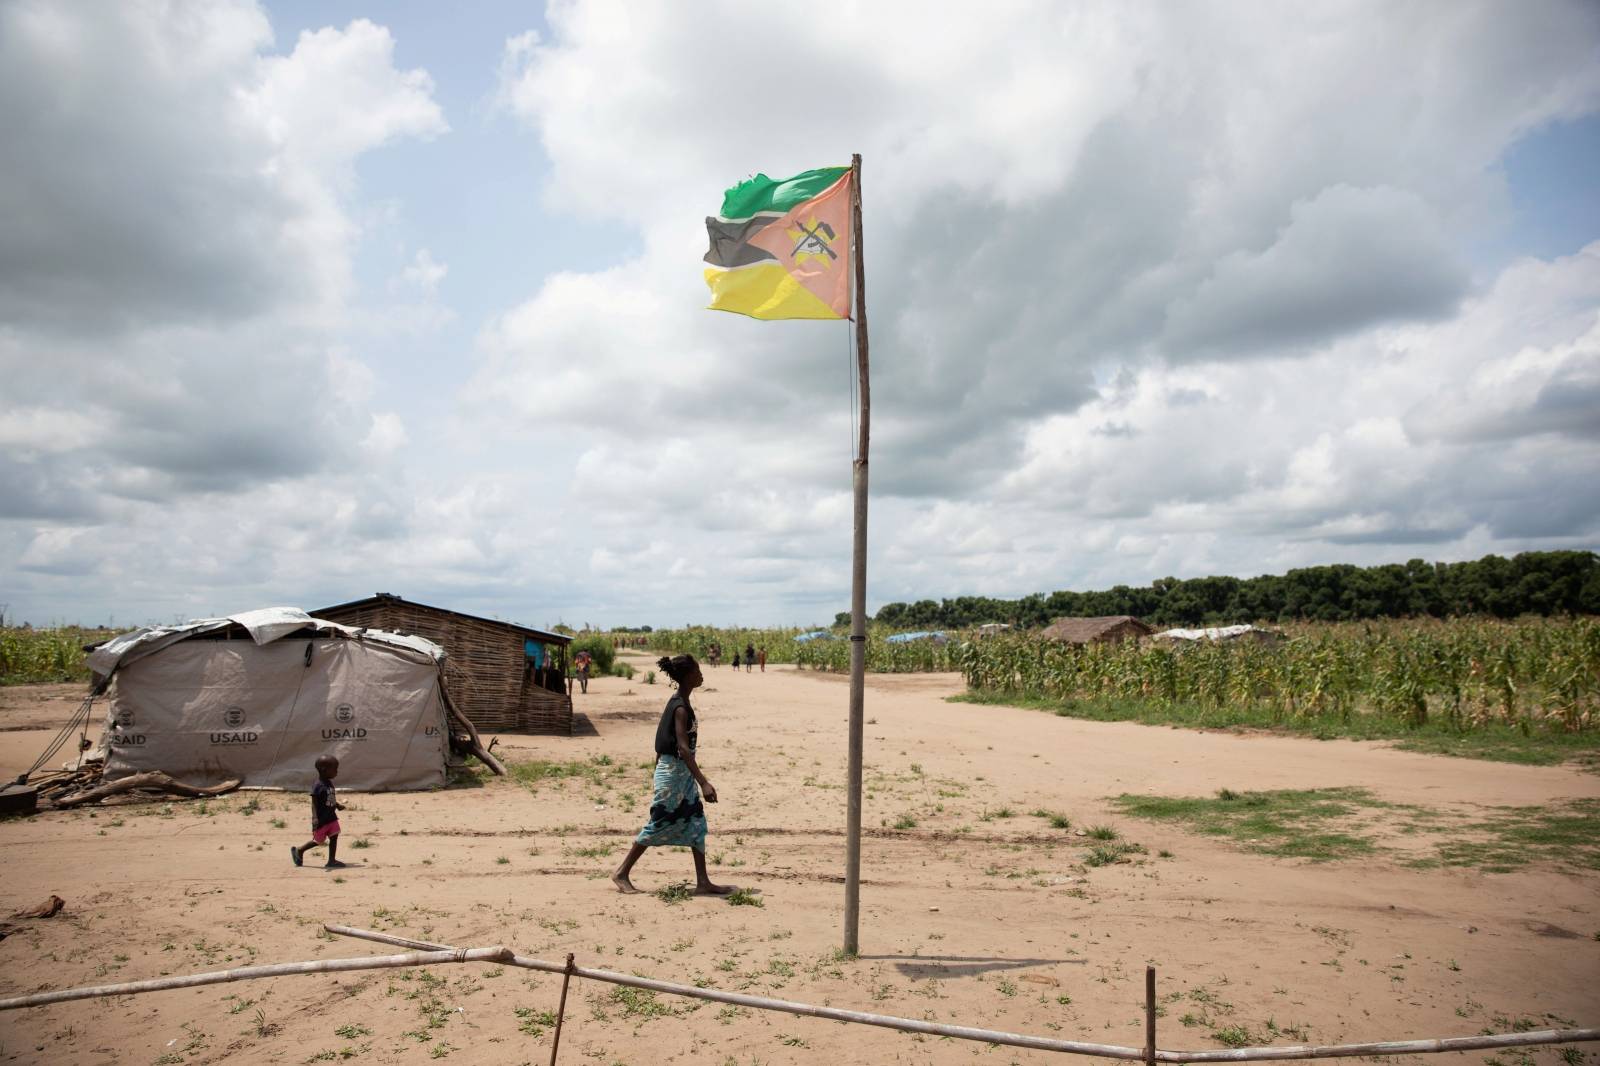 A woman walks past a Mozambique flag in Ndedja resettlement camp in Nhamatanda District, Mozambique